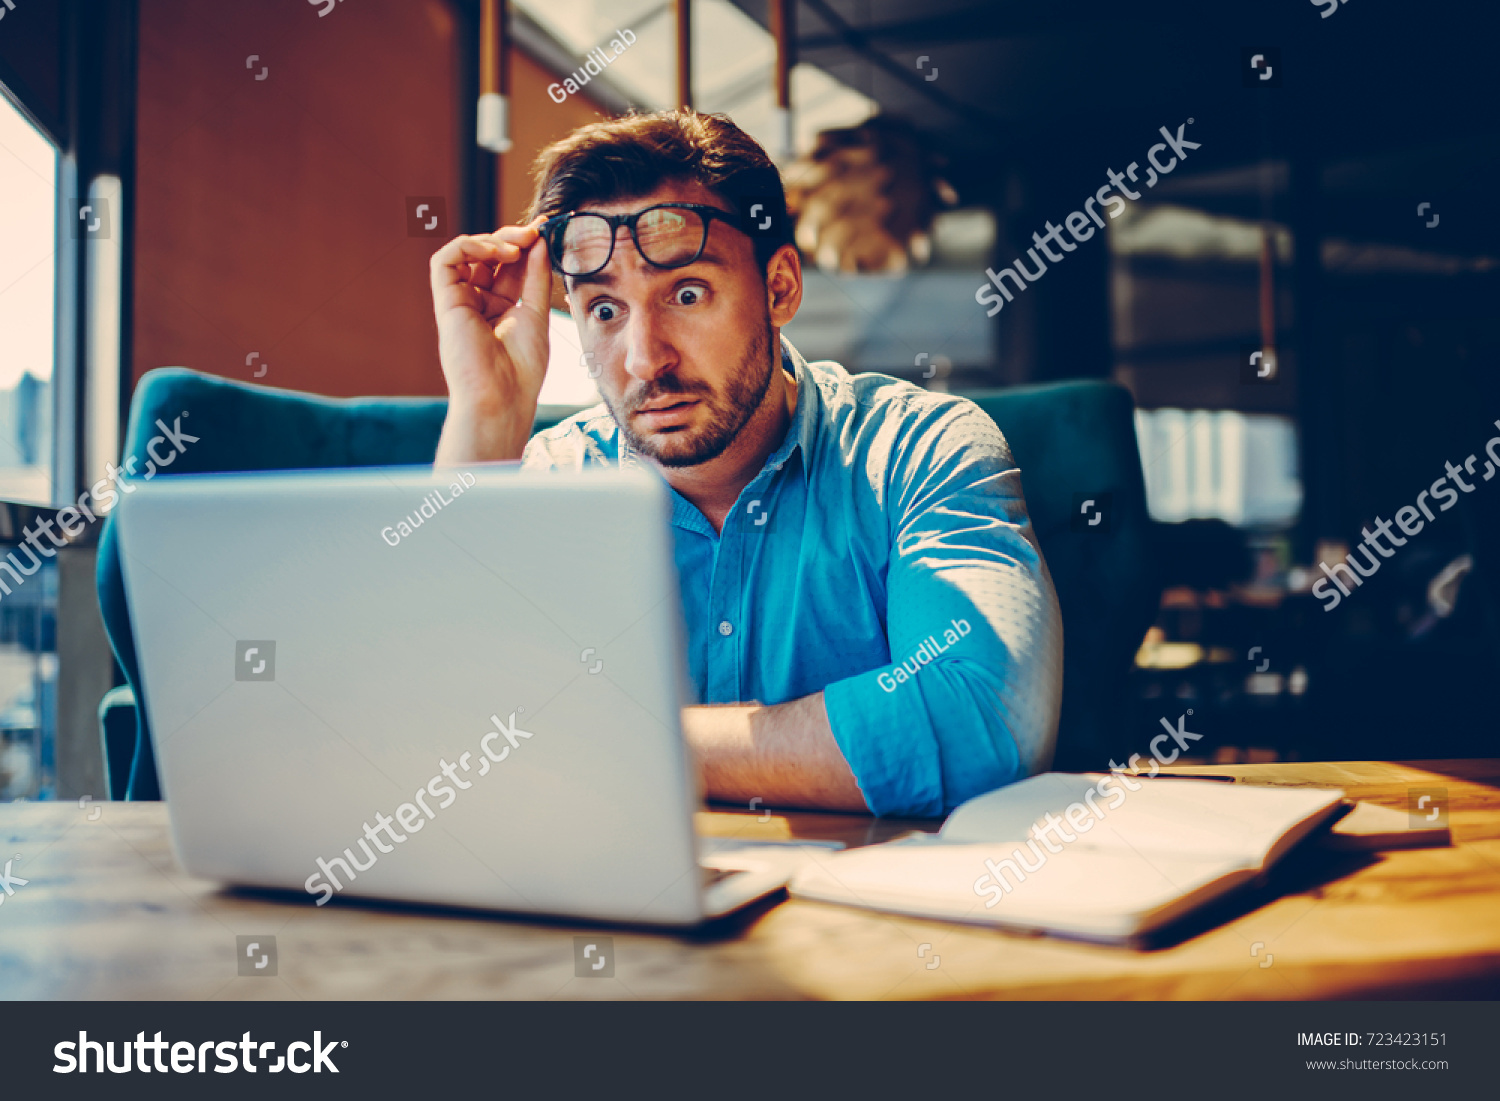 Shocked businessman getting off eyeglasses can't believe in low company income reading documents.Stressed entrepreneur doubting in receipt numbers worried about paying debt checking banking account #723423151